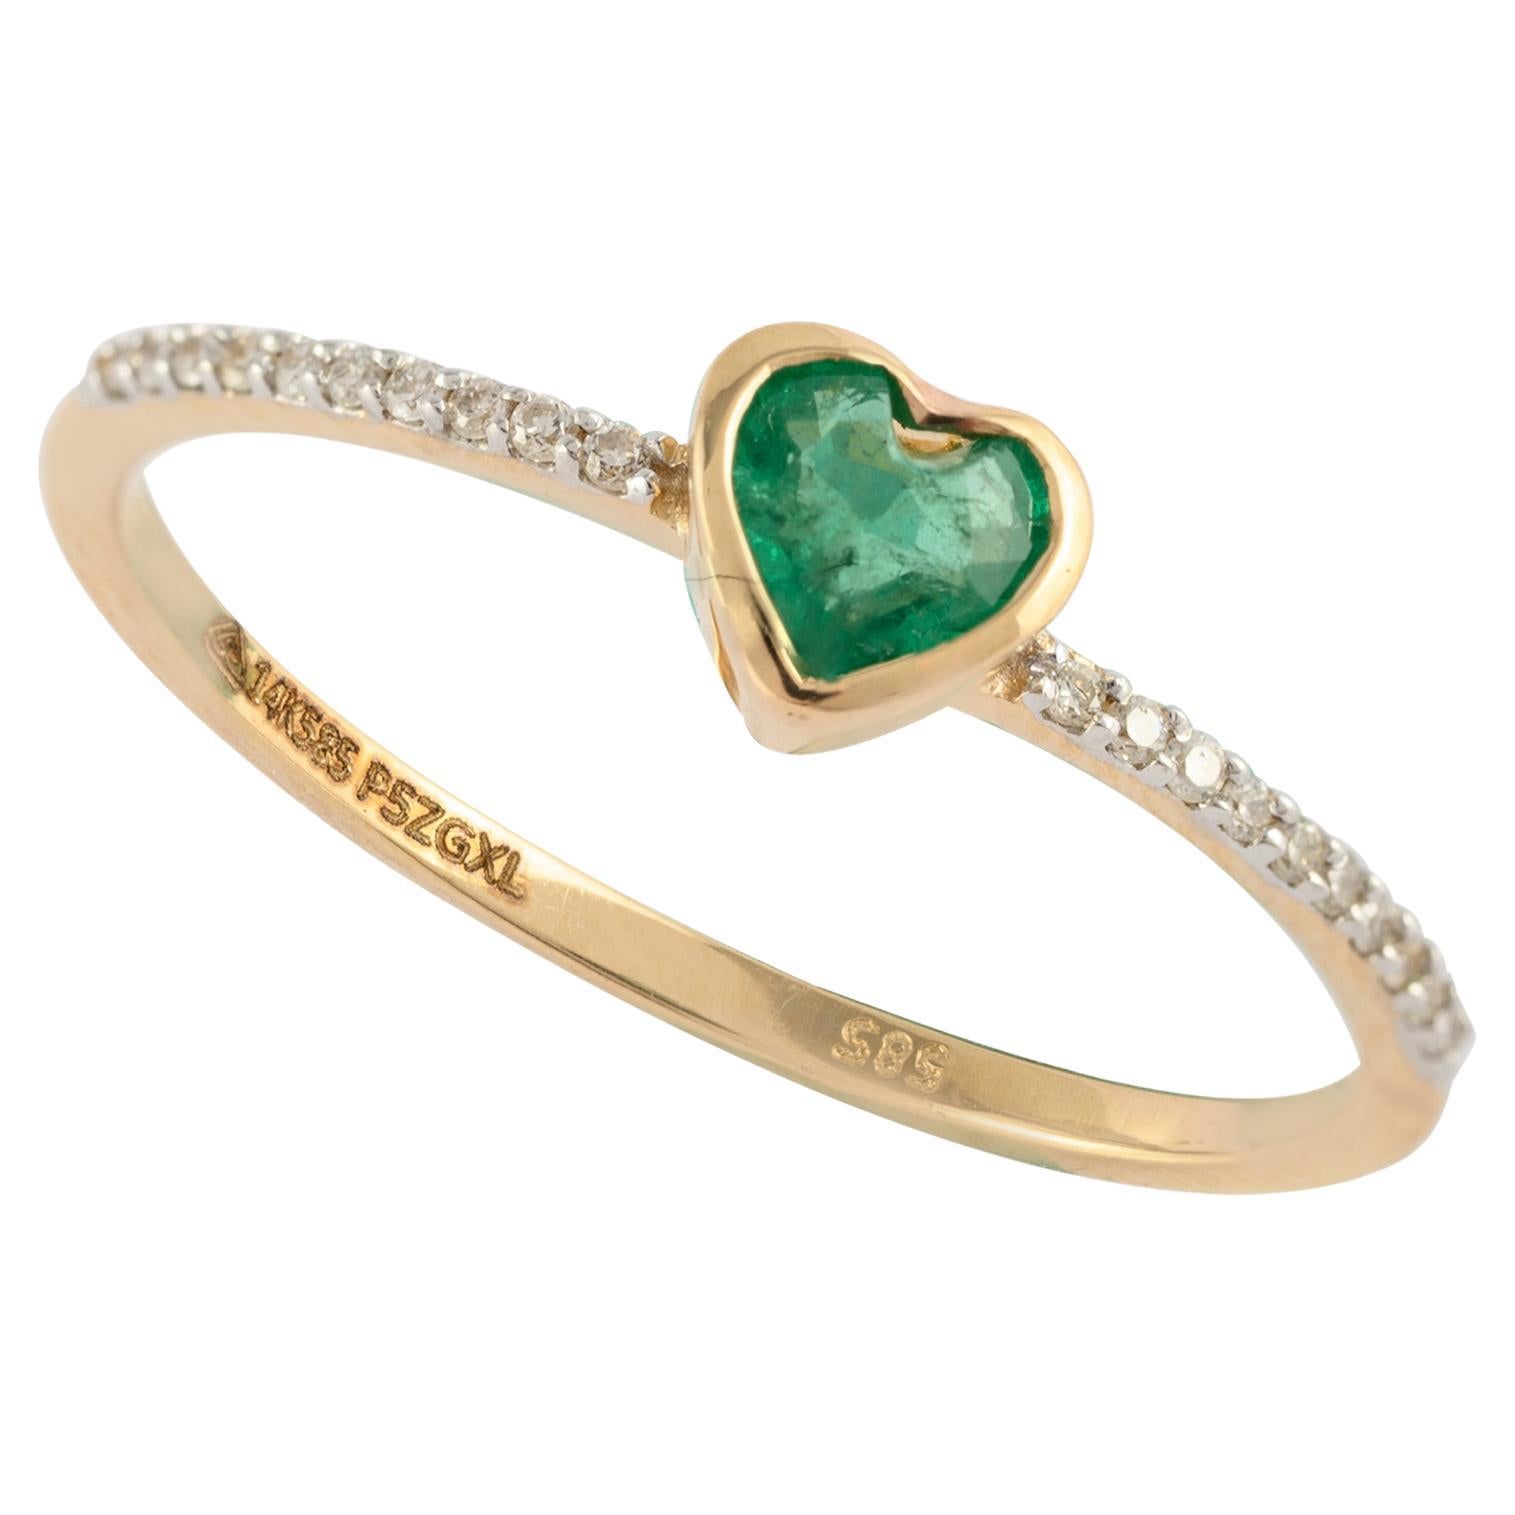 Minimalist Heart Cut Emerald Ring Set in 14k Solid Yellow Gold with Diamonds